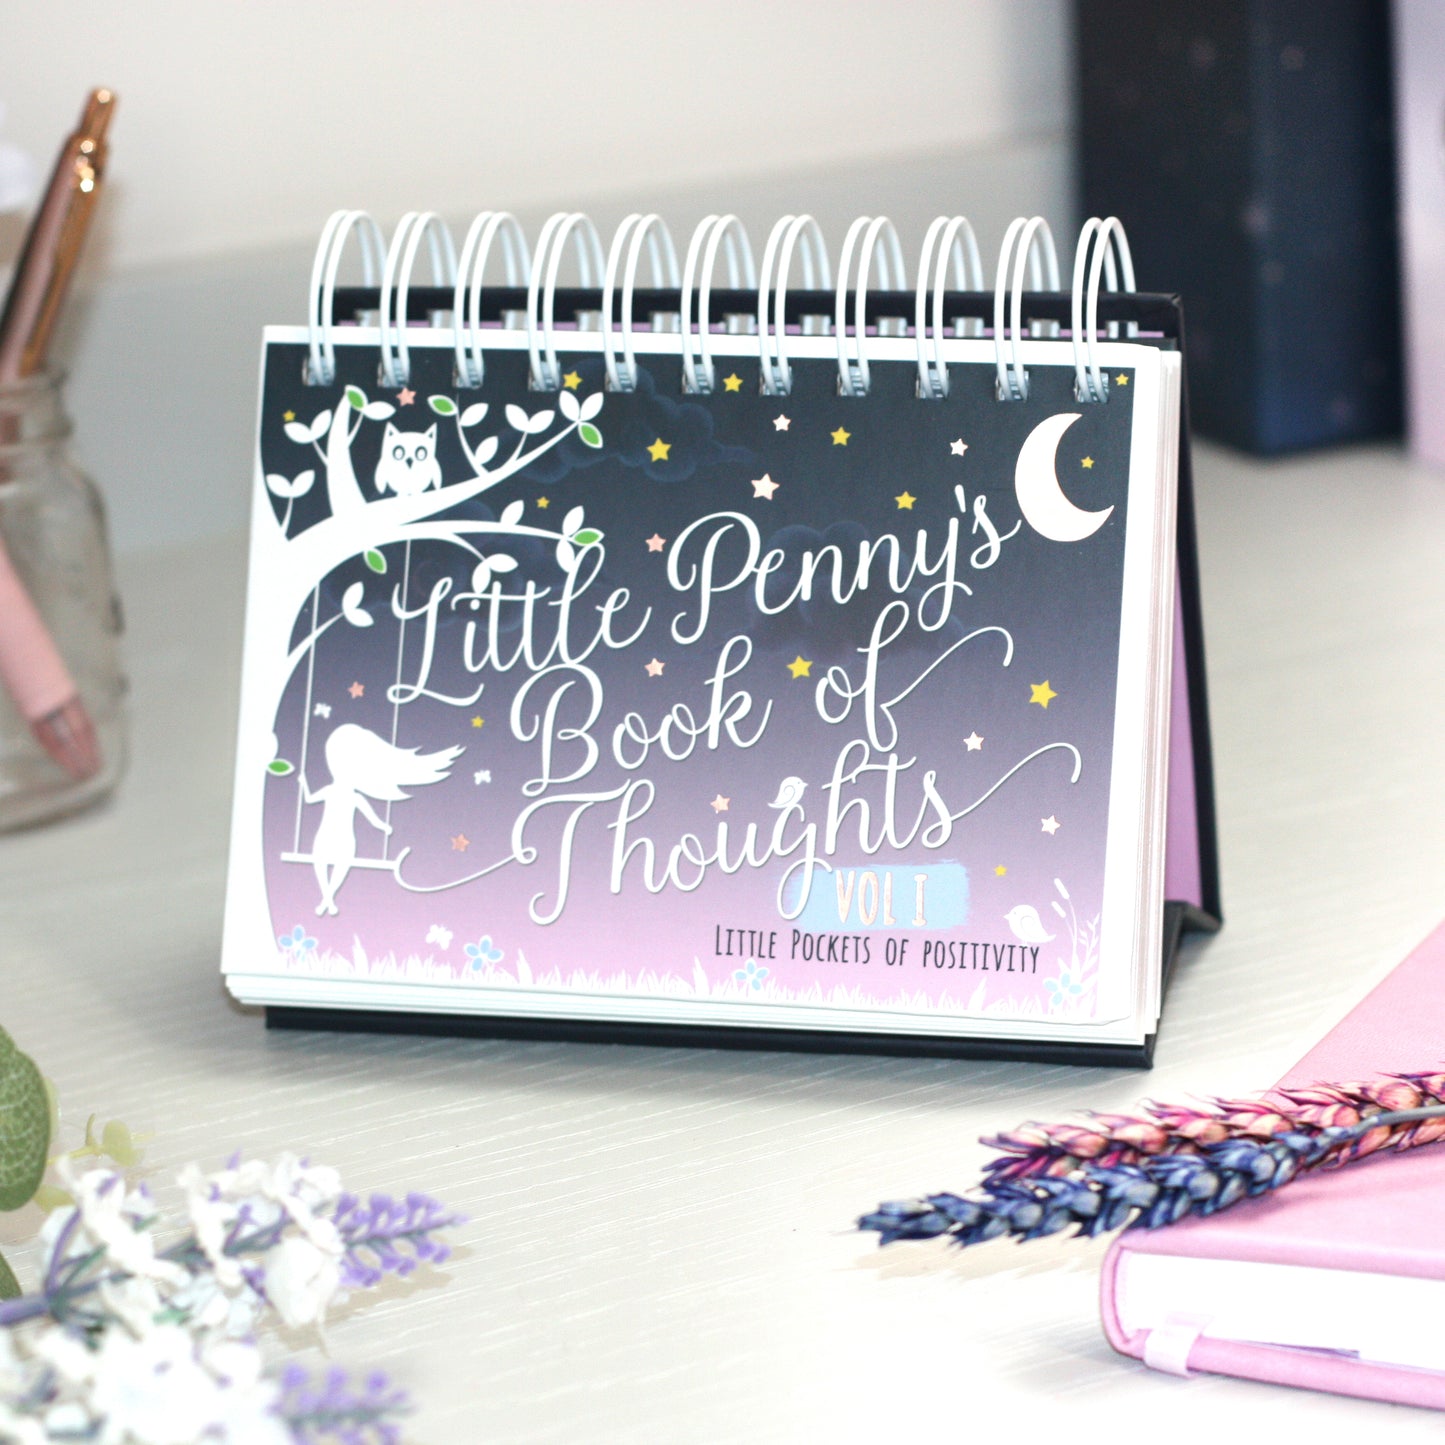 Vol I "Little Penny's Book of Thoughts" Flip Calendar